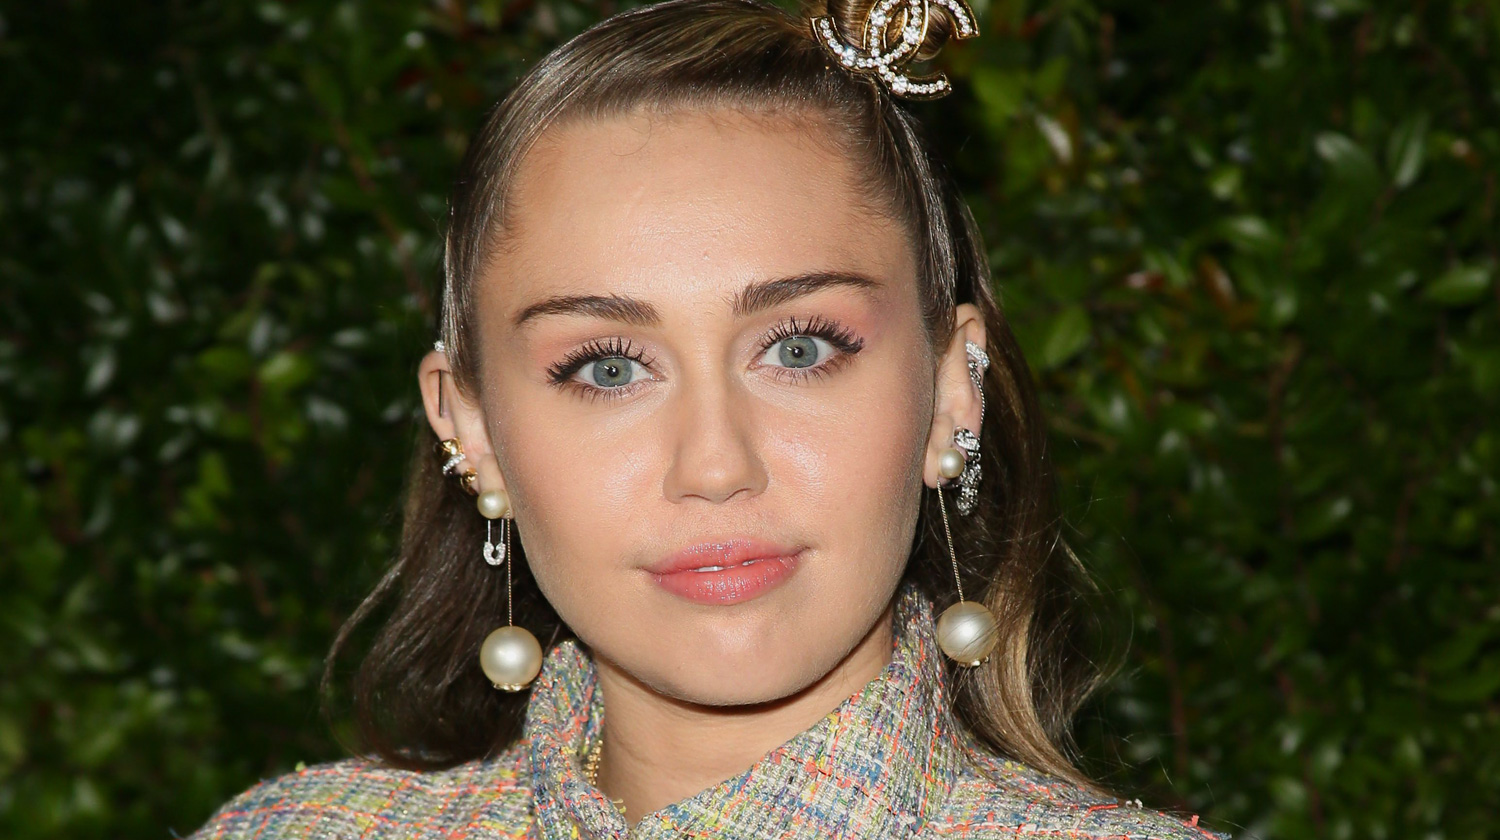 miley-cyrus-attends-charles-finch-and-chanels-11th-annual-news-photo-1571775054